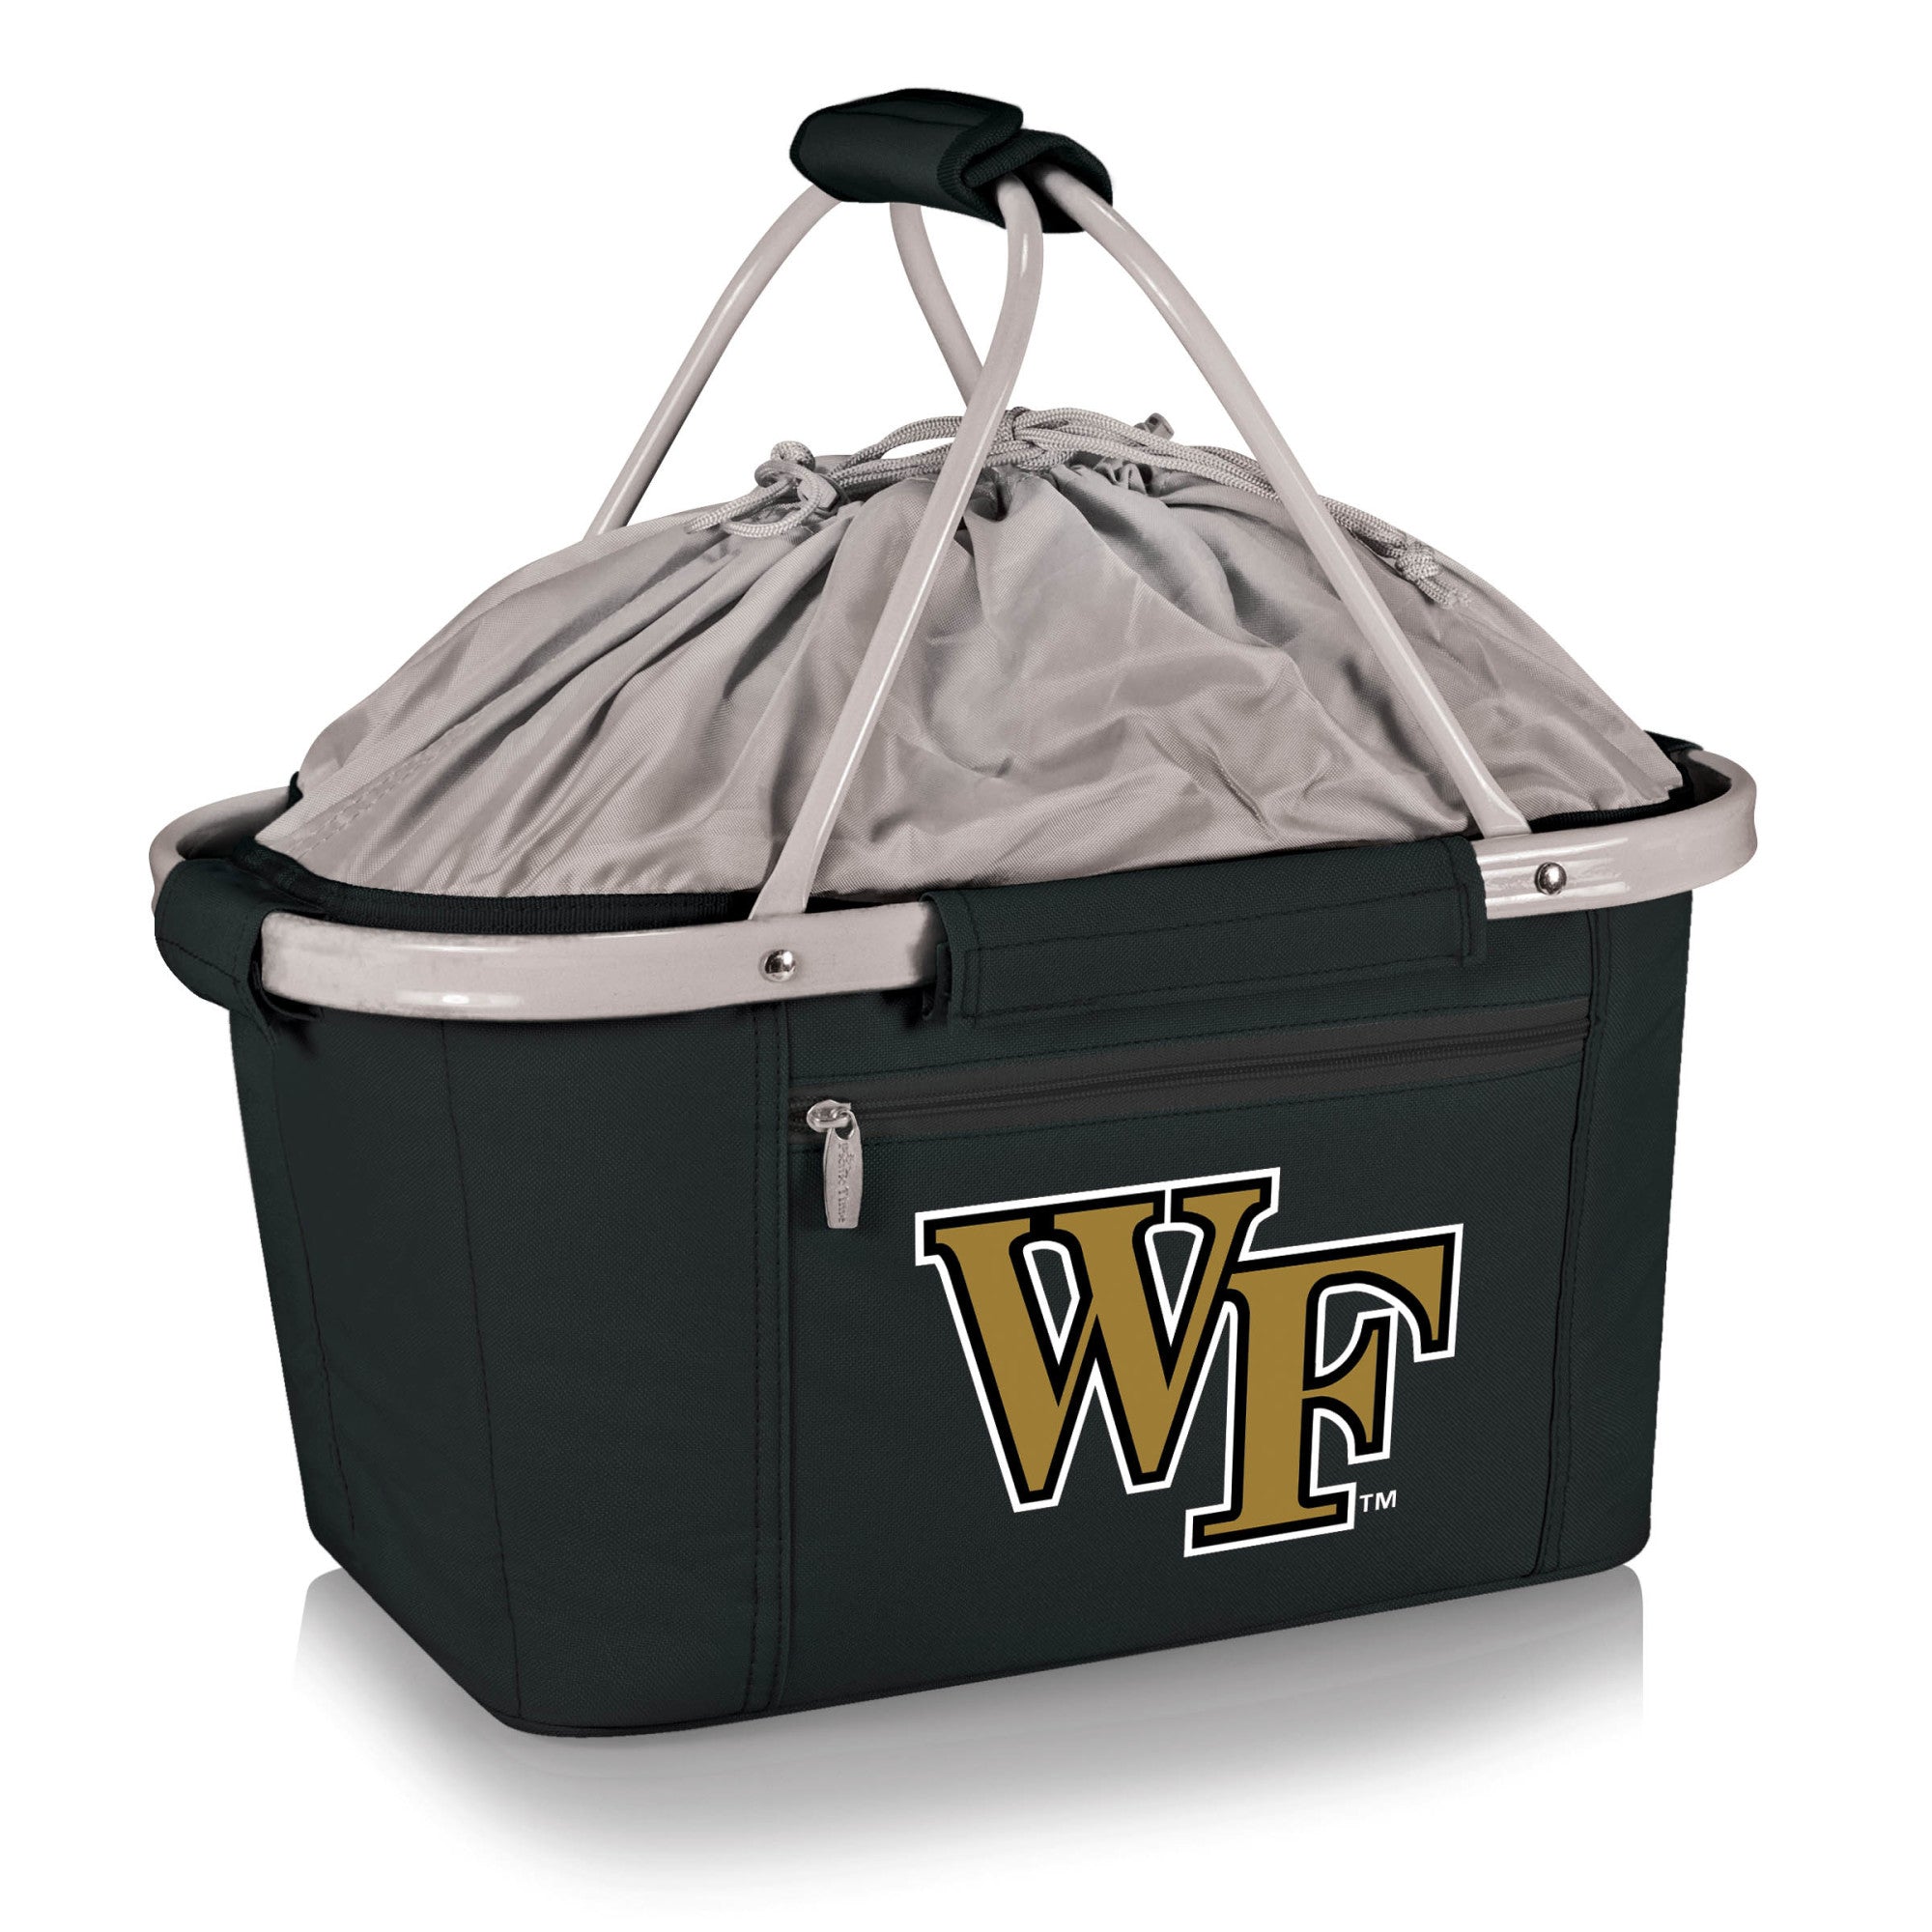 Wake Forest Demon Deacons - Metro Basket Collapsible Cooler Tote, (Black)